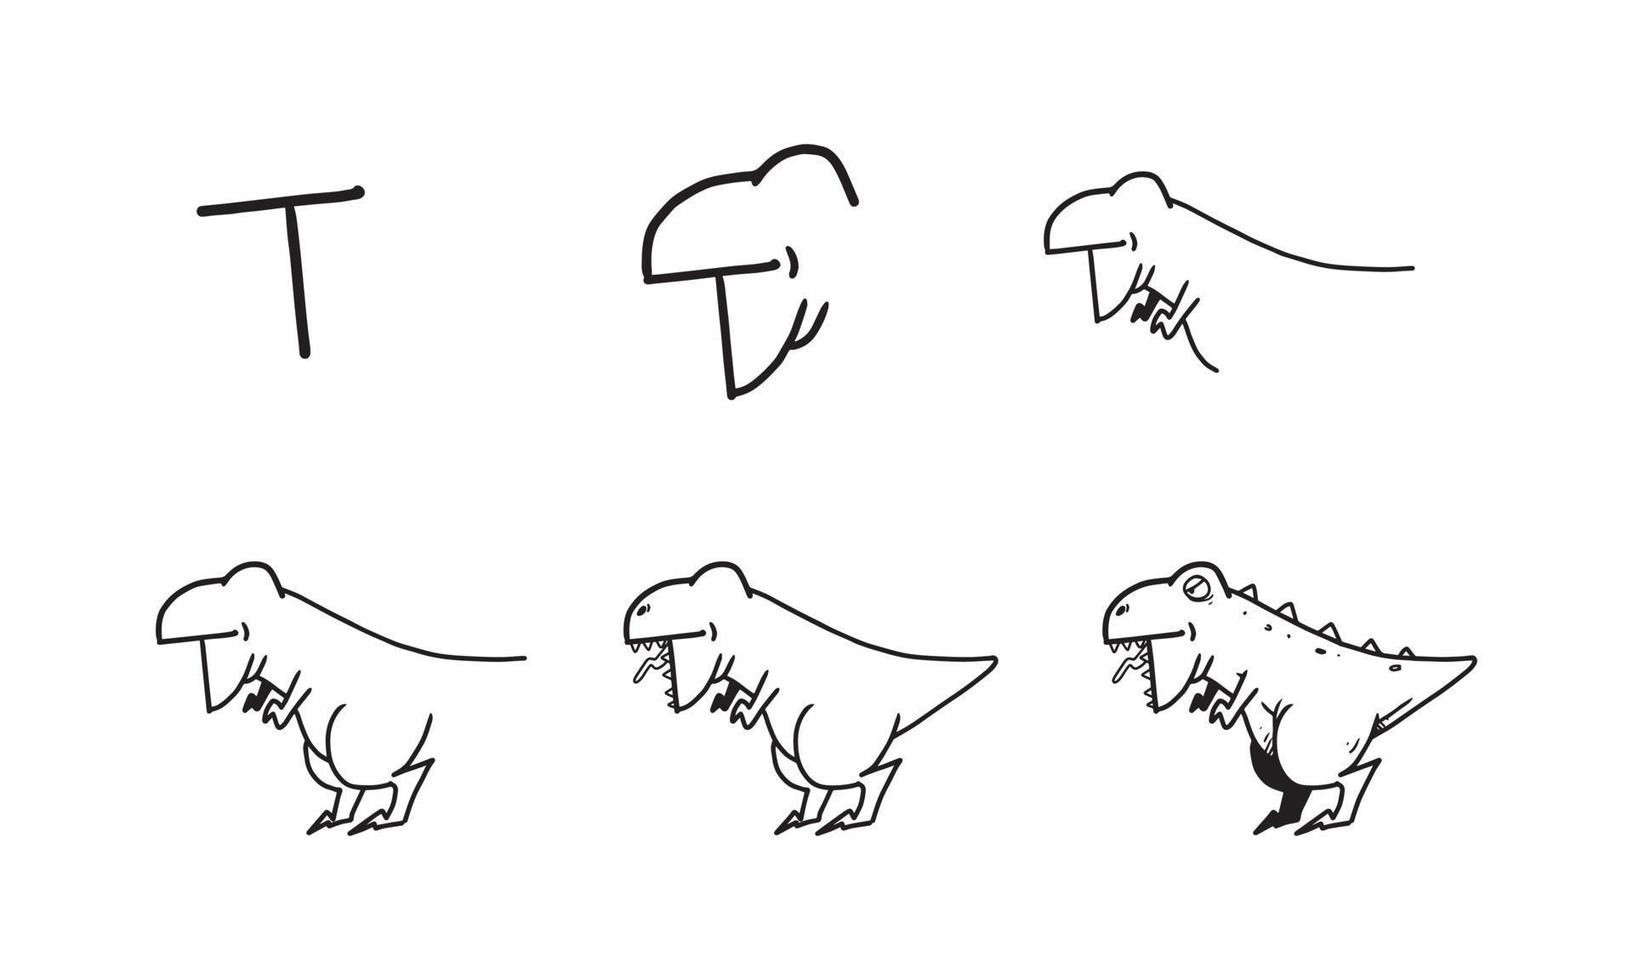 how to draw a cute t rex from T step by step. easy and fun activity for kids development and creativity. tutorial of drawing animal and object from alphabet series in vector illustration.